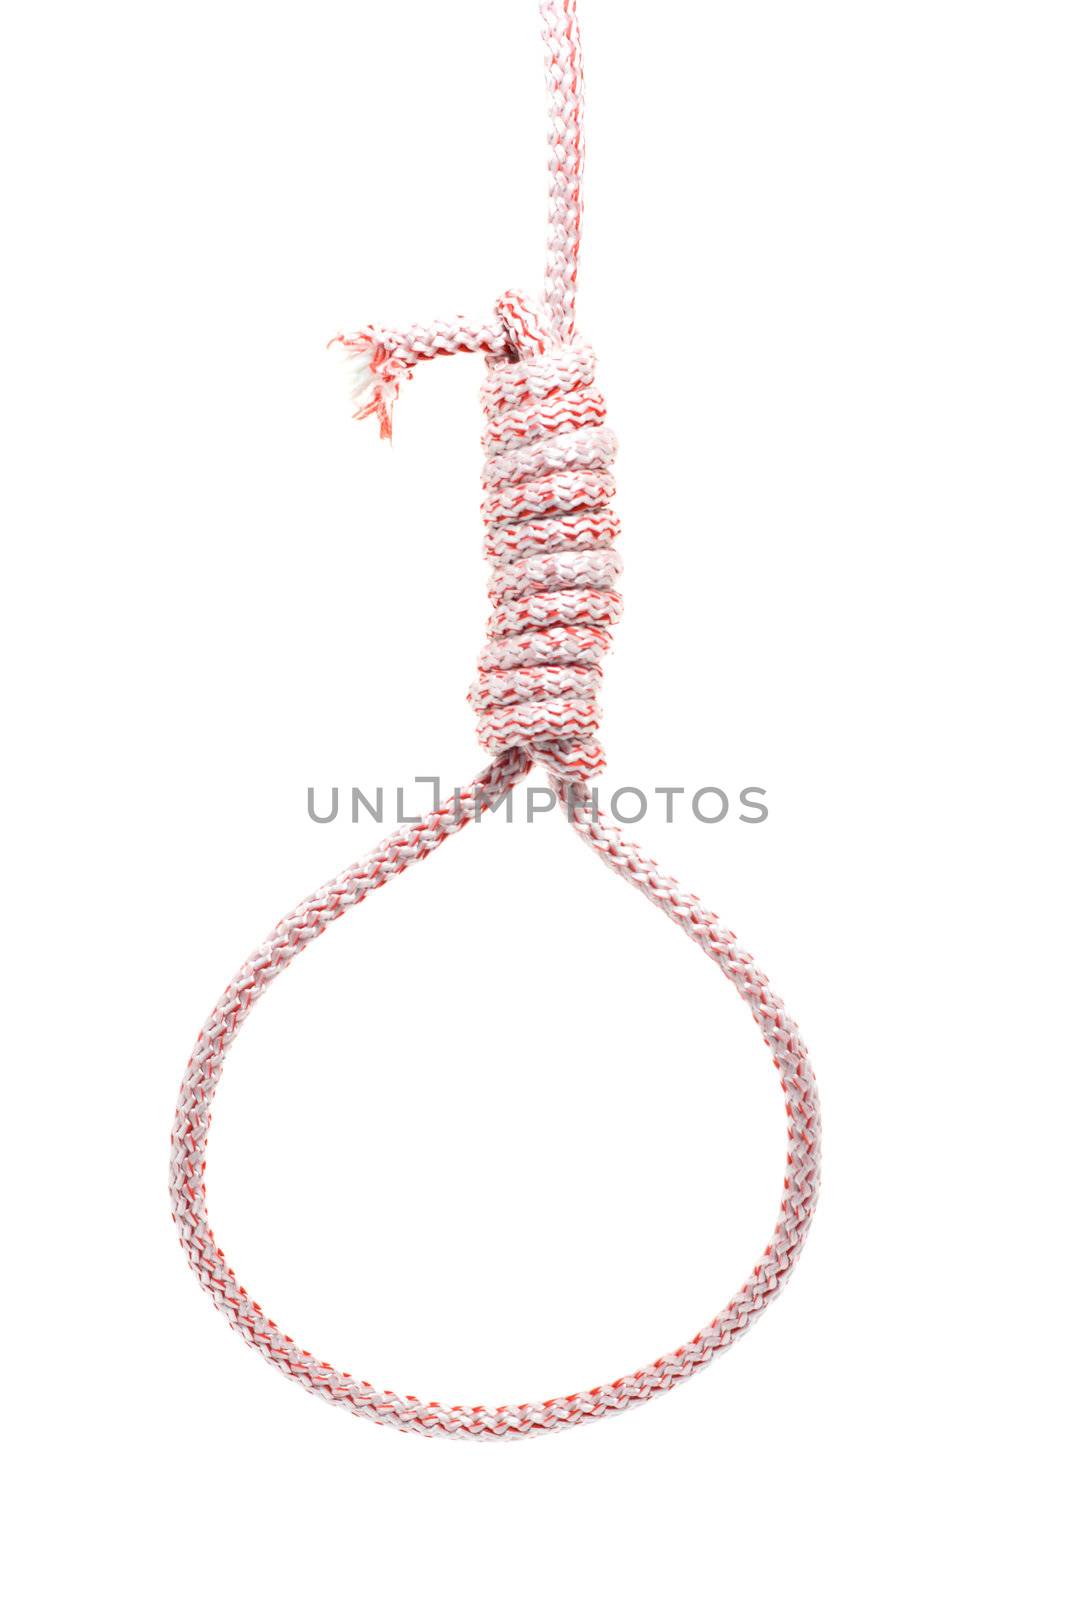 Noose from red-white rope, isolated on white